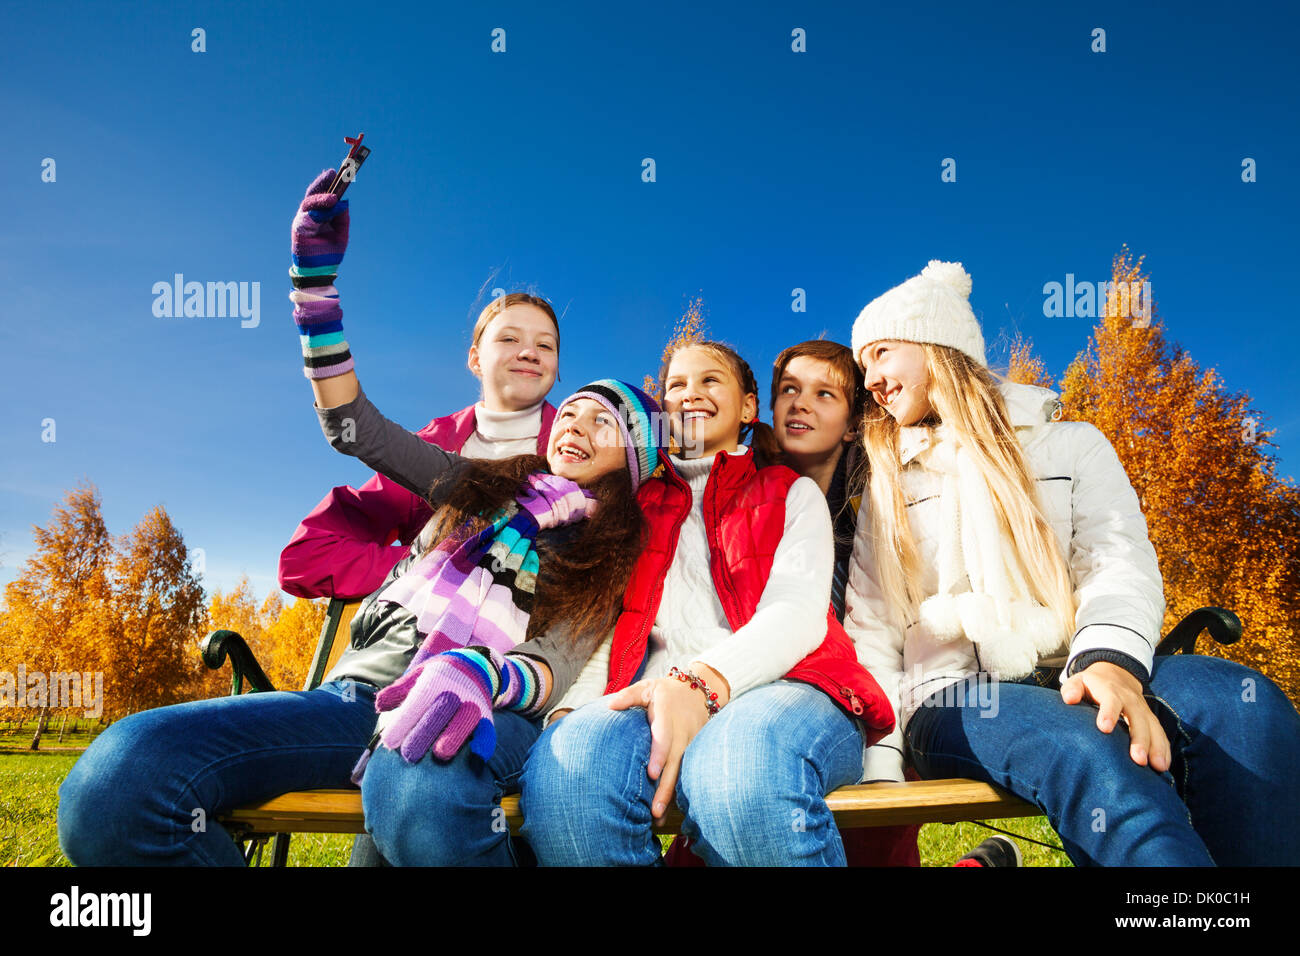 Kids, teen boy and girls photographing themselves with camera on cell phone hugging smiling and posing Stock Photo